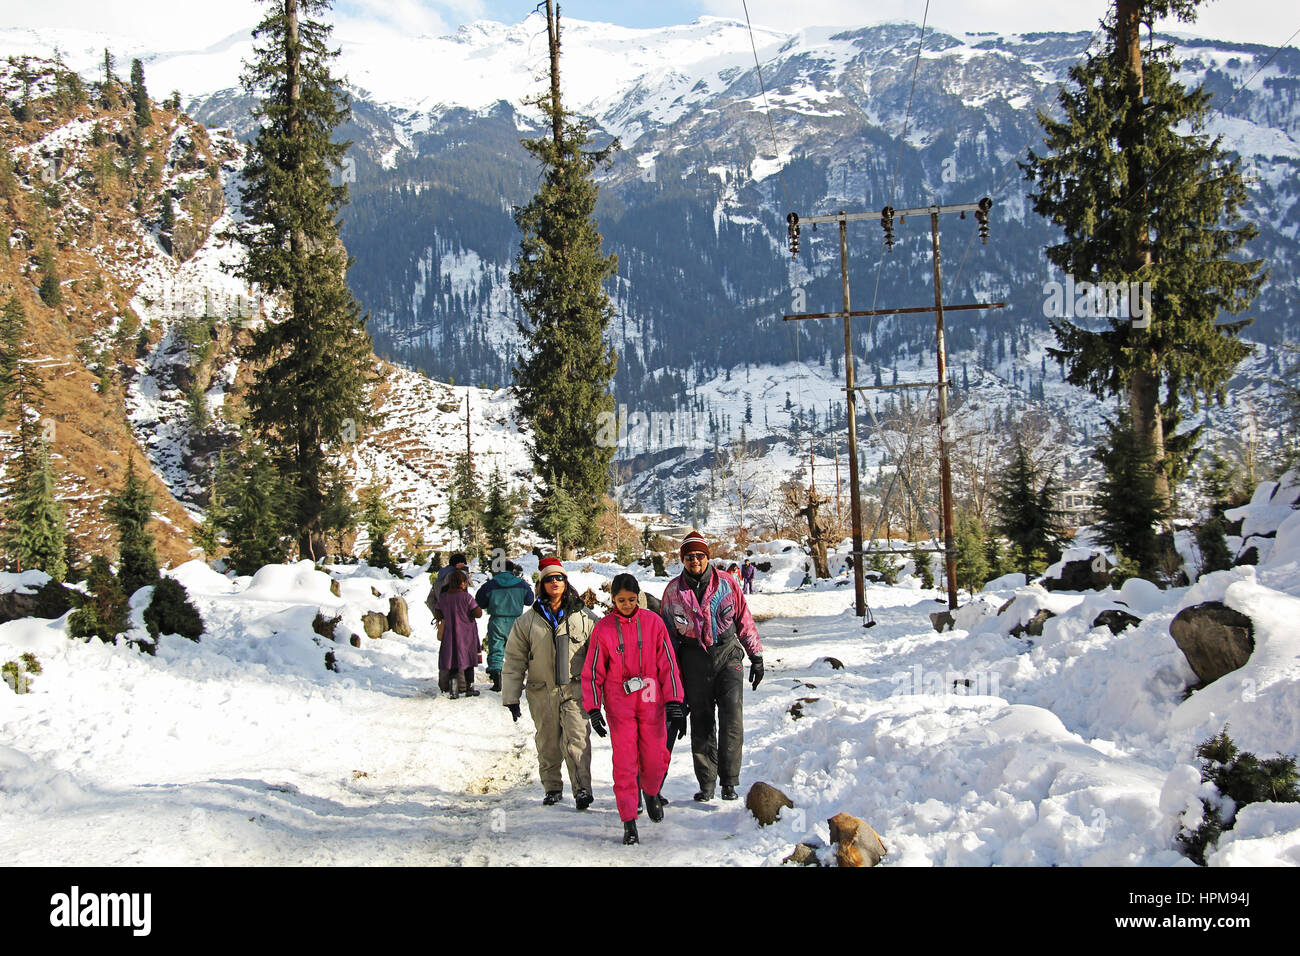 Tourists trekking in snow-clad Himalayan mountain ranges in Manali, India. Stock Photo